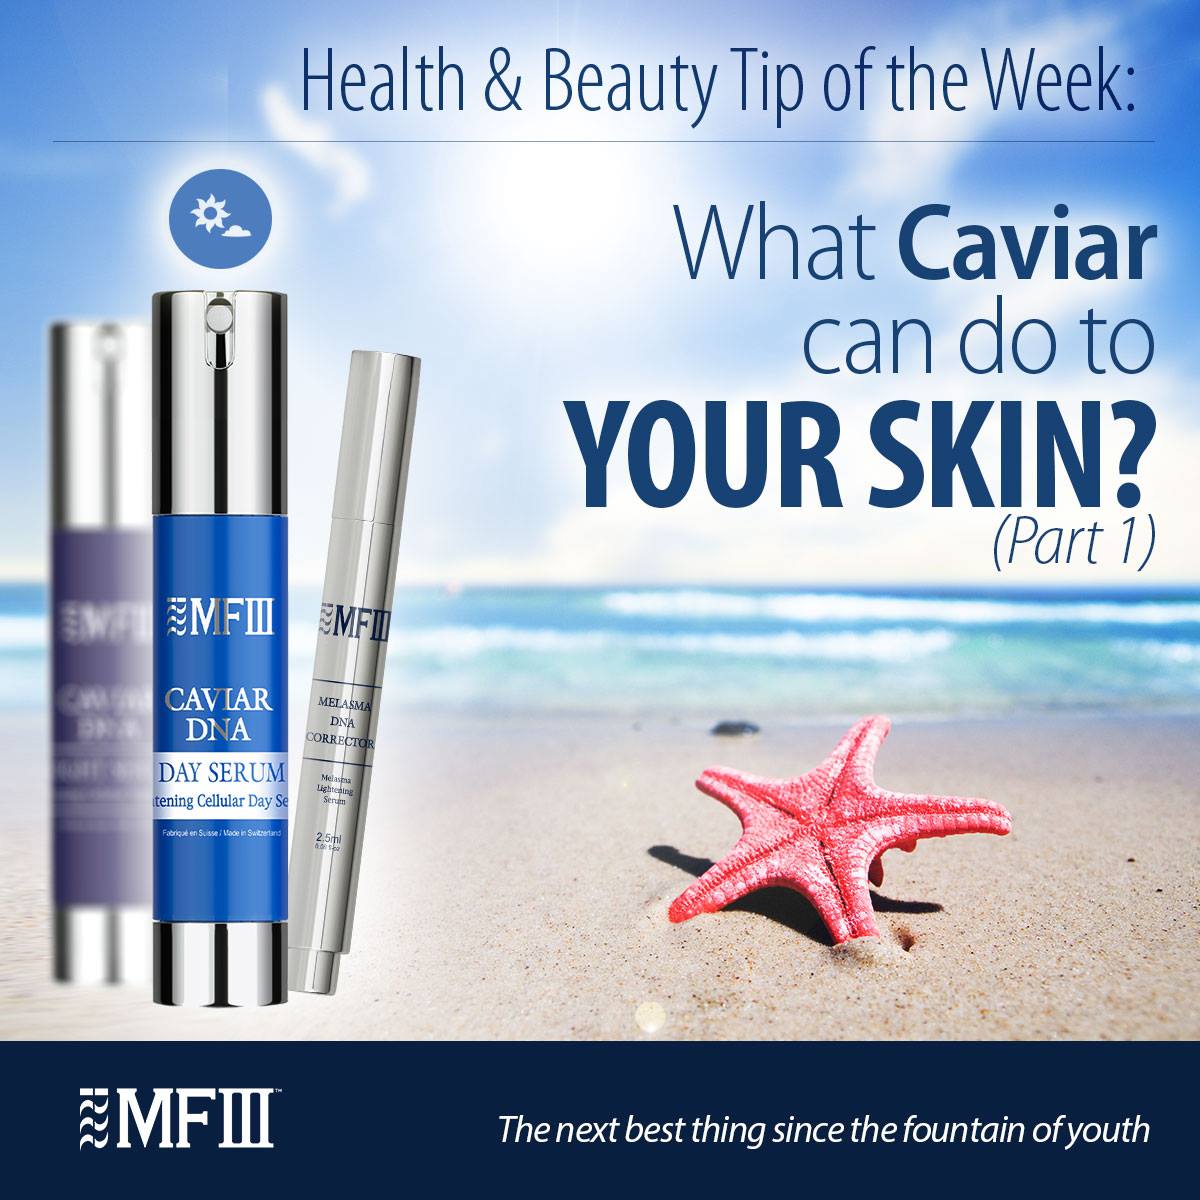 What Caviar can do to your skin?